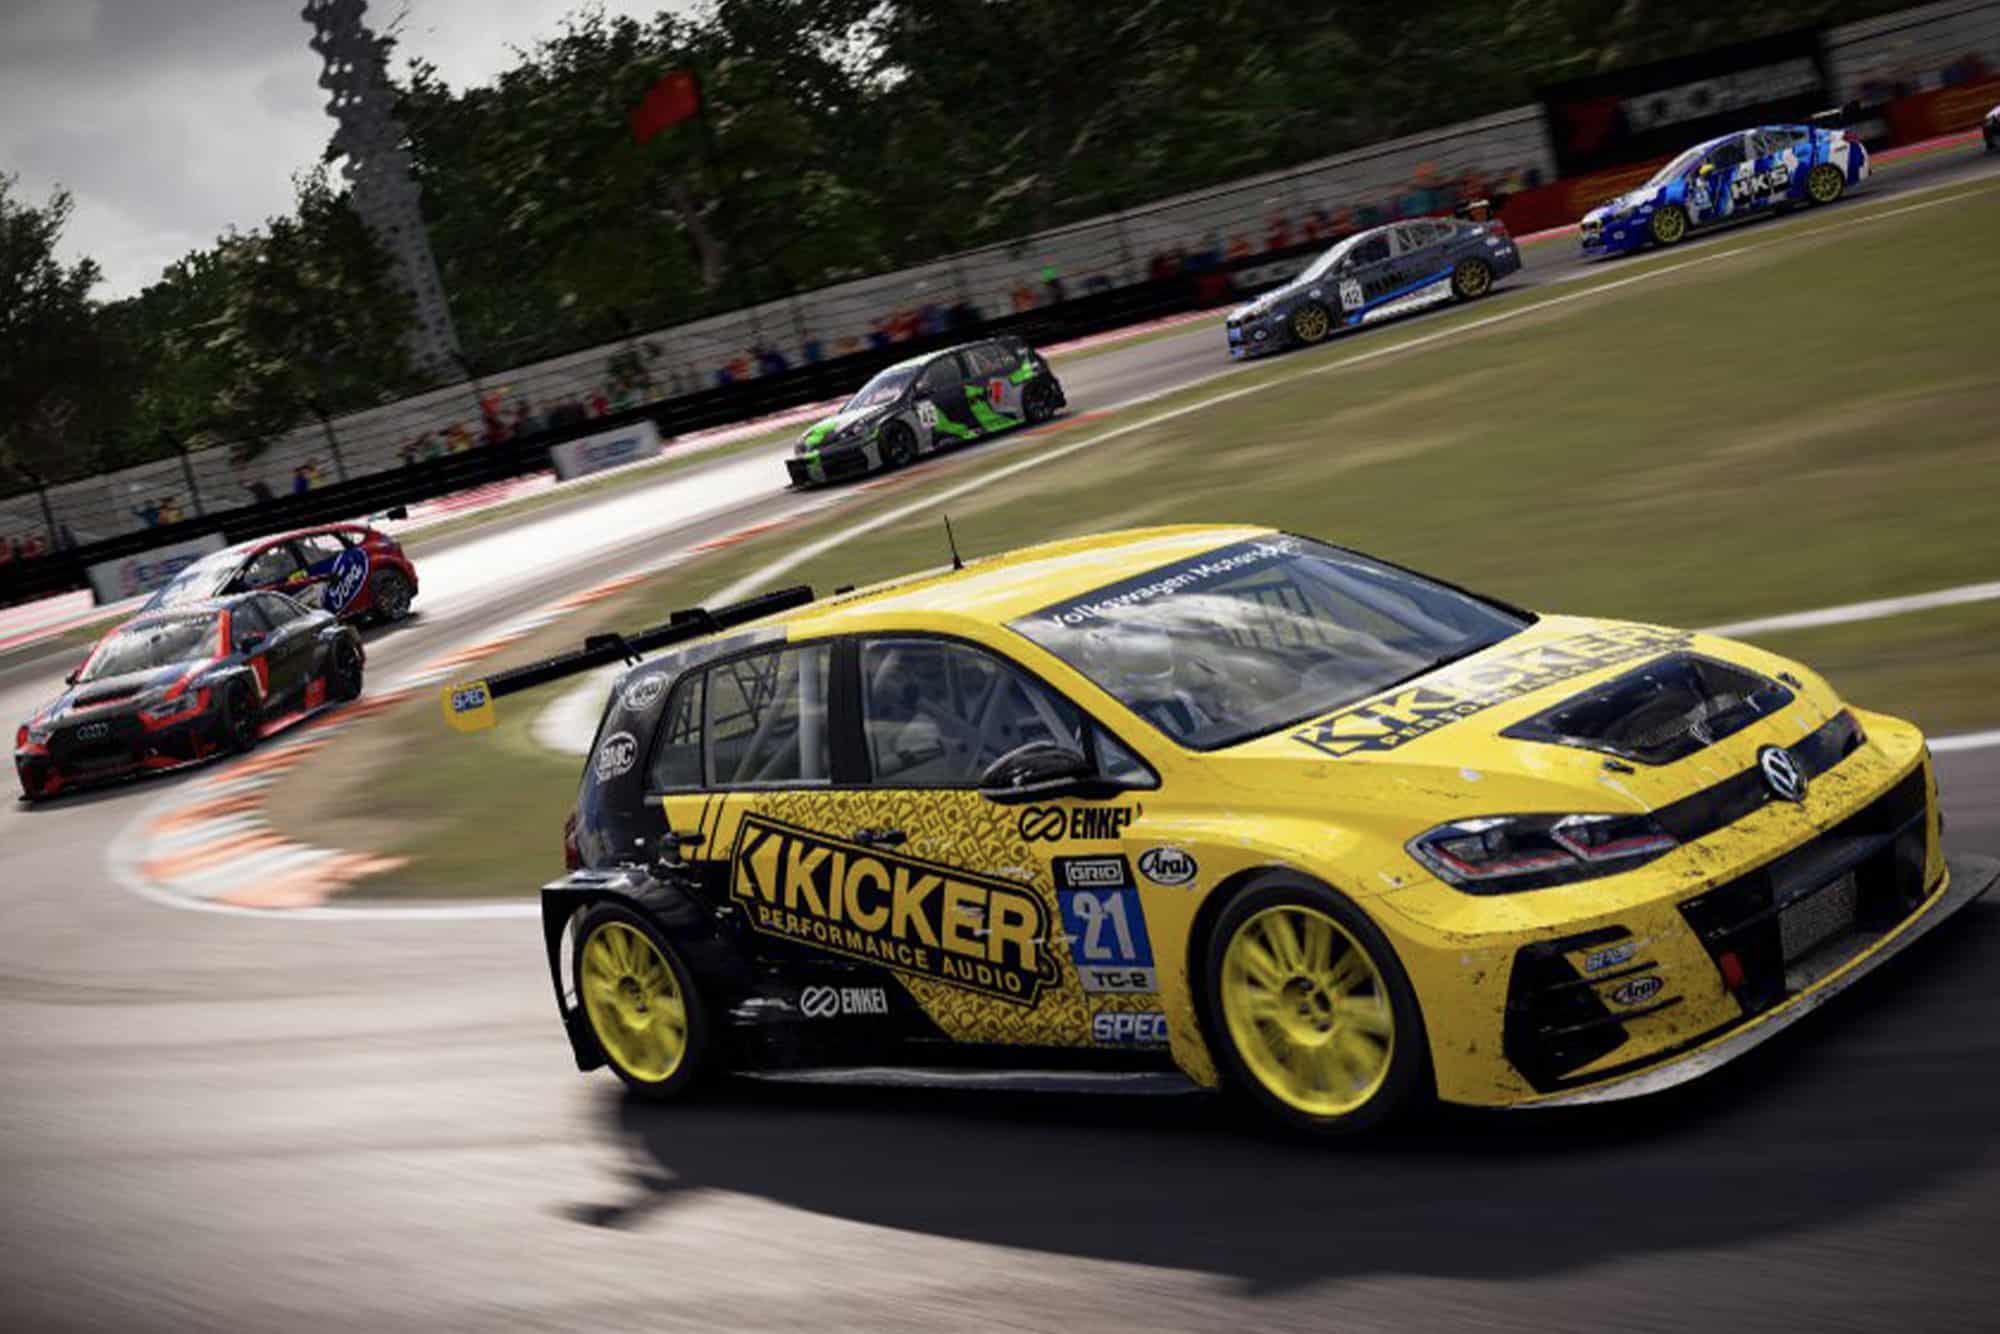 Grid Autosport hands-on preview